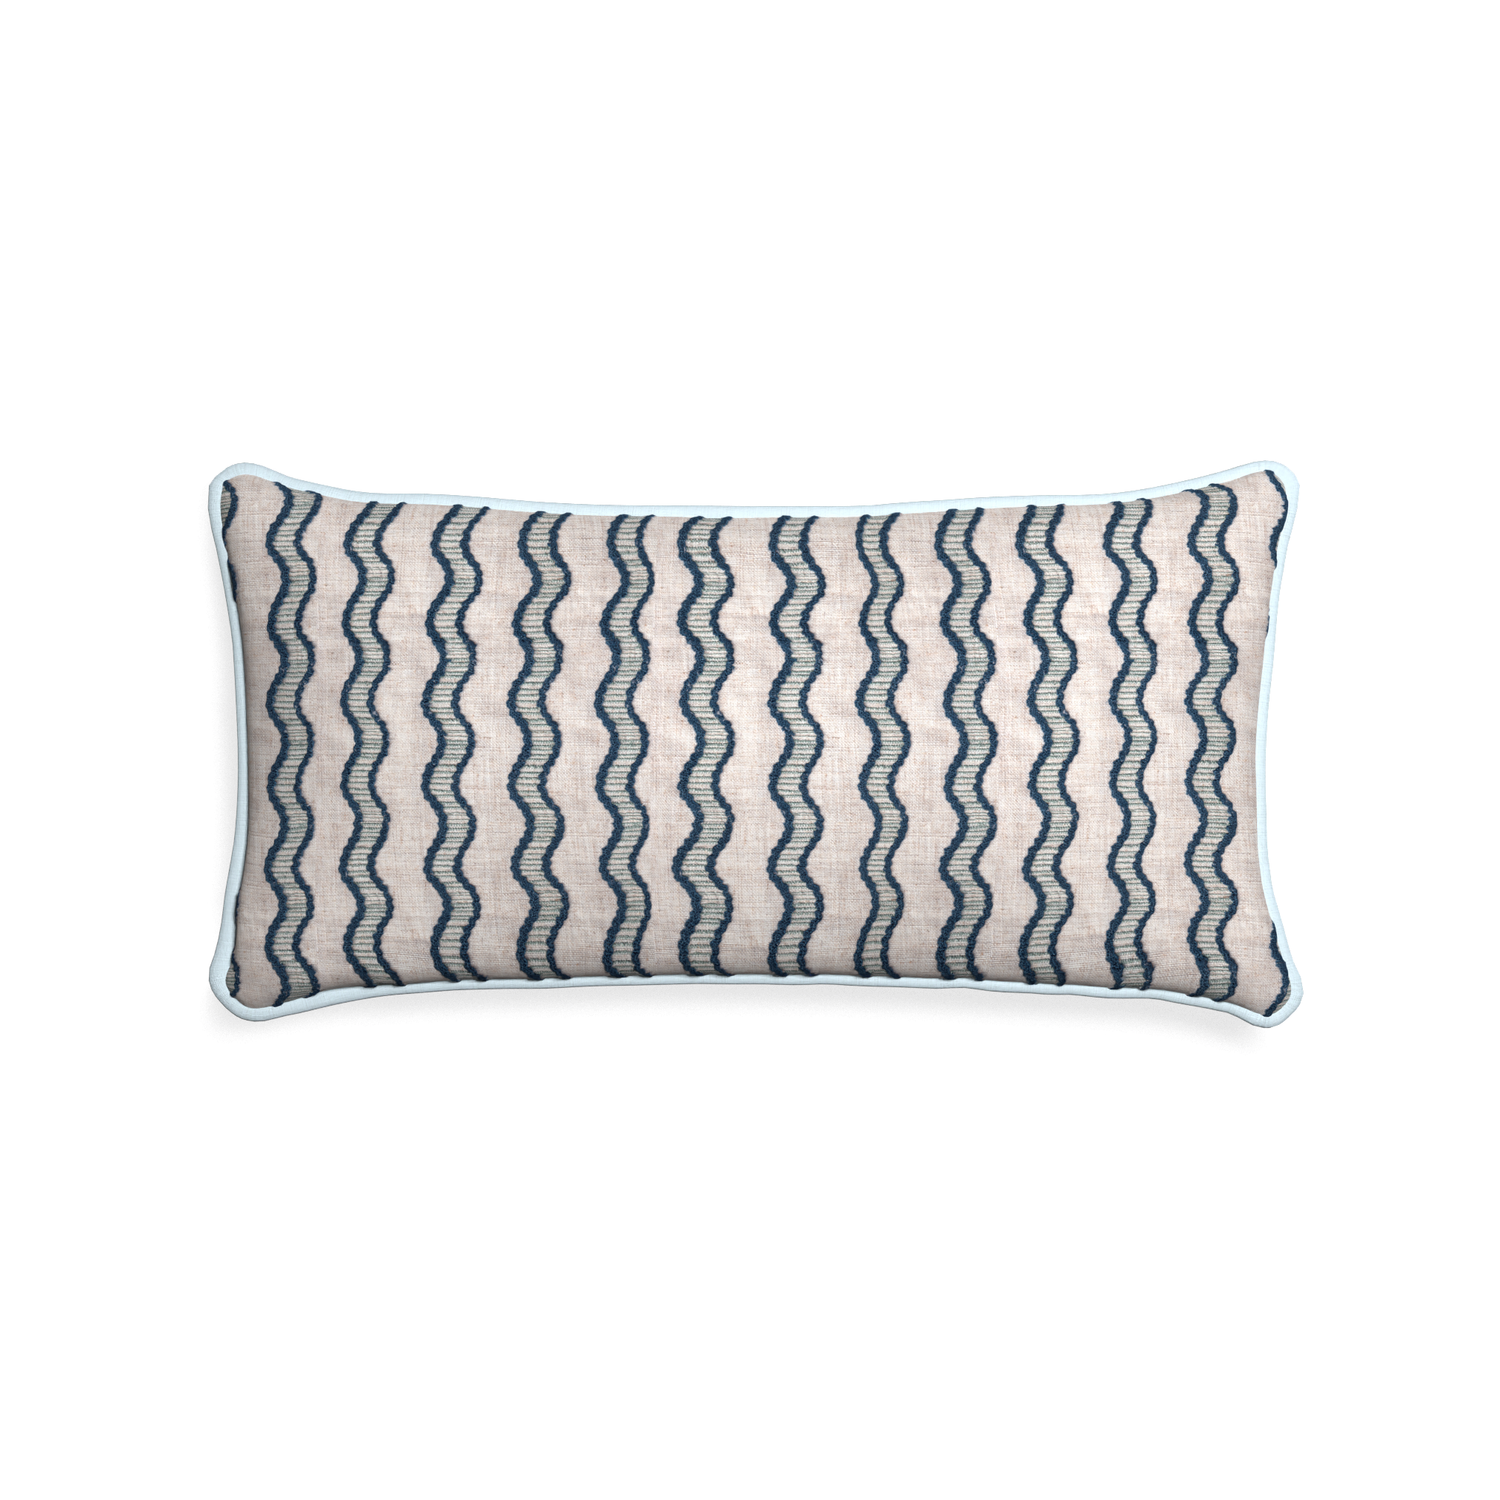 Midi-lumbar beatrice custom embroidered wavepillow with powder piping on white background